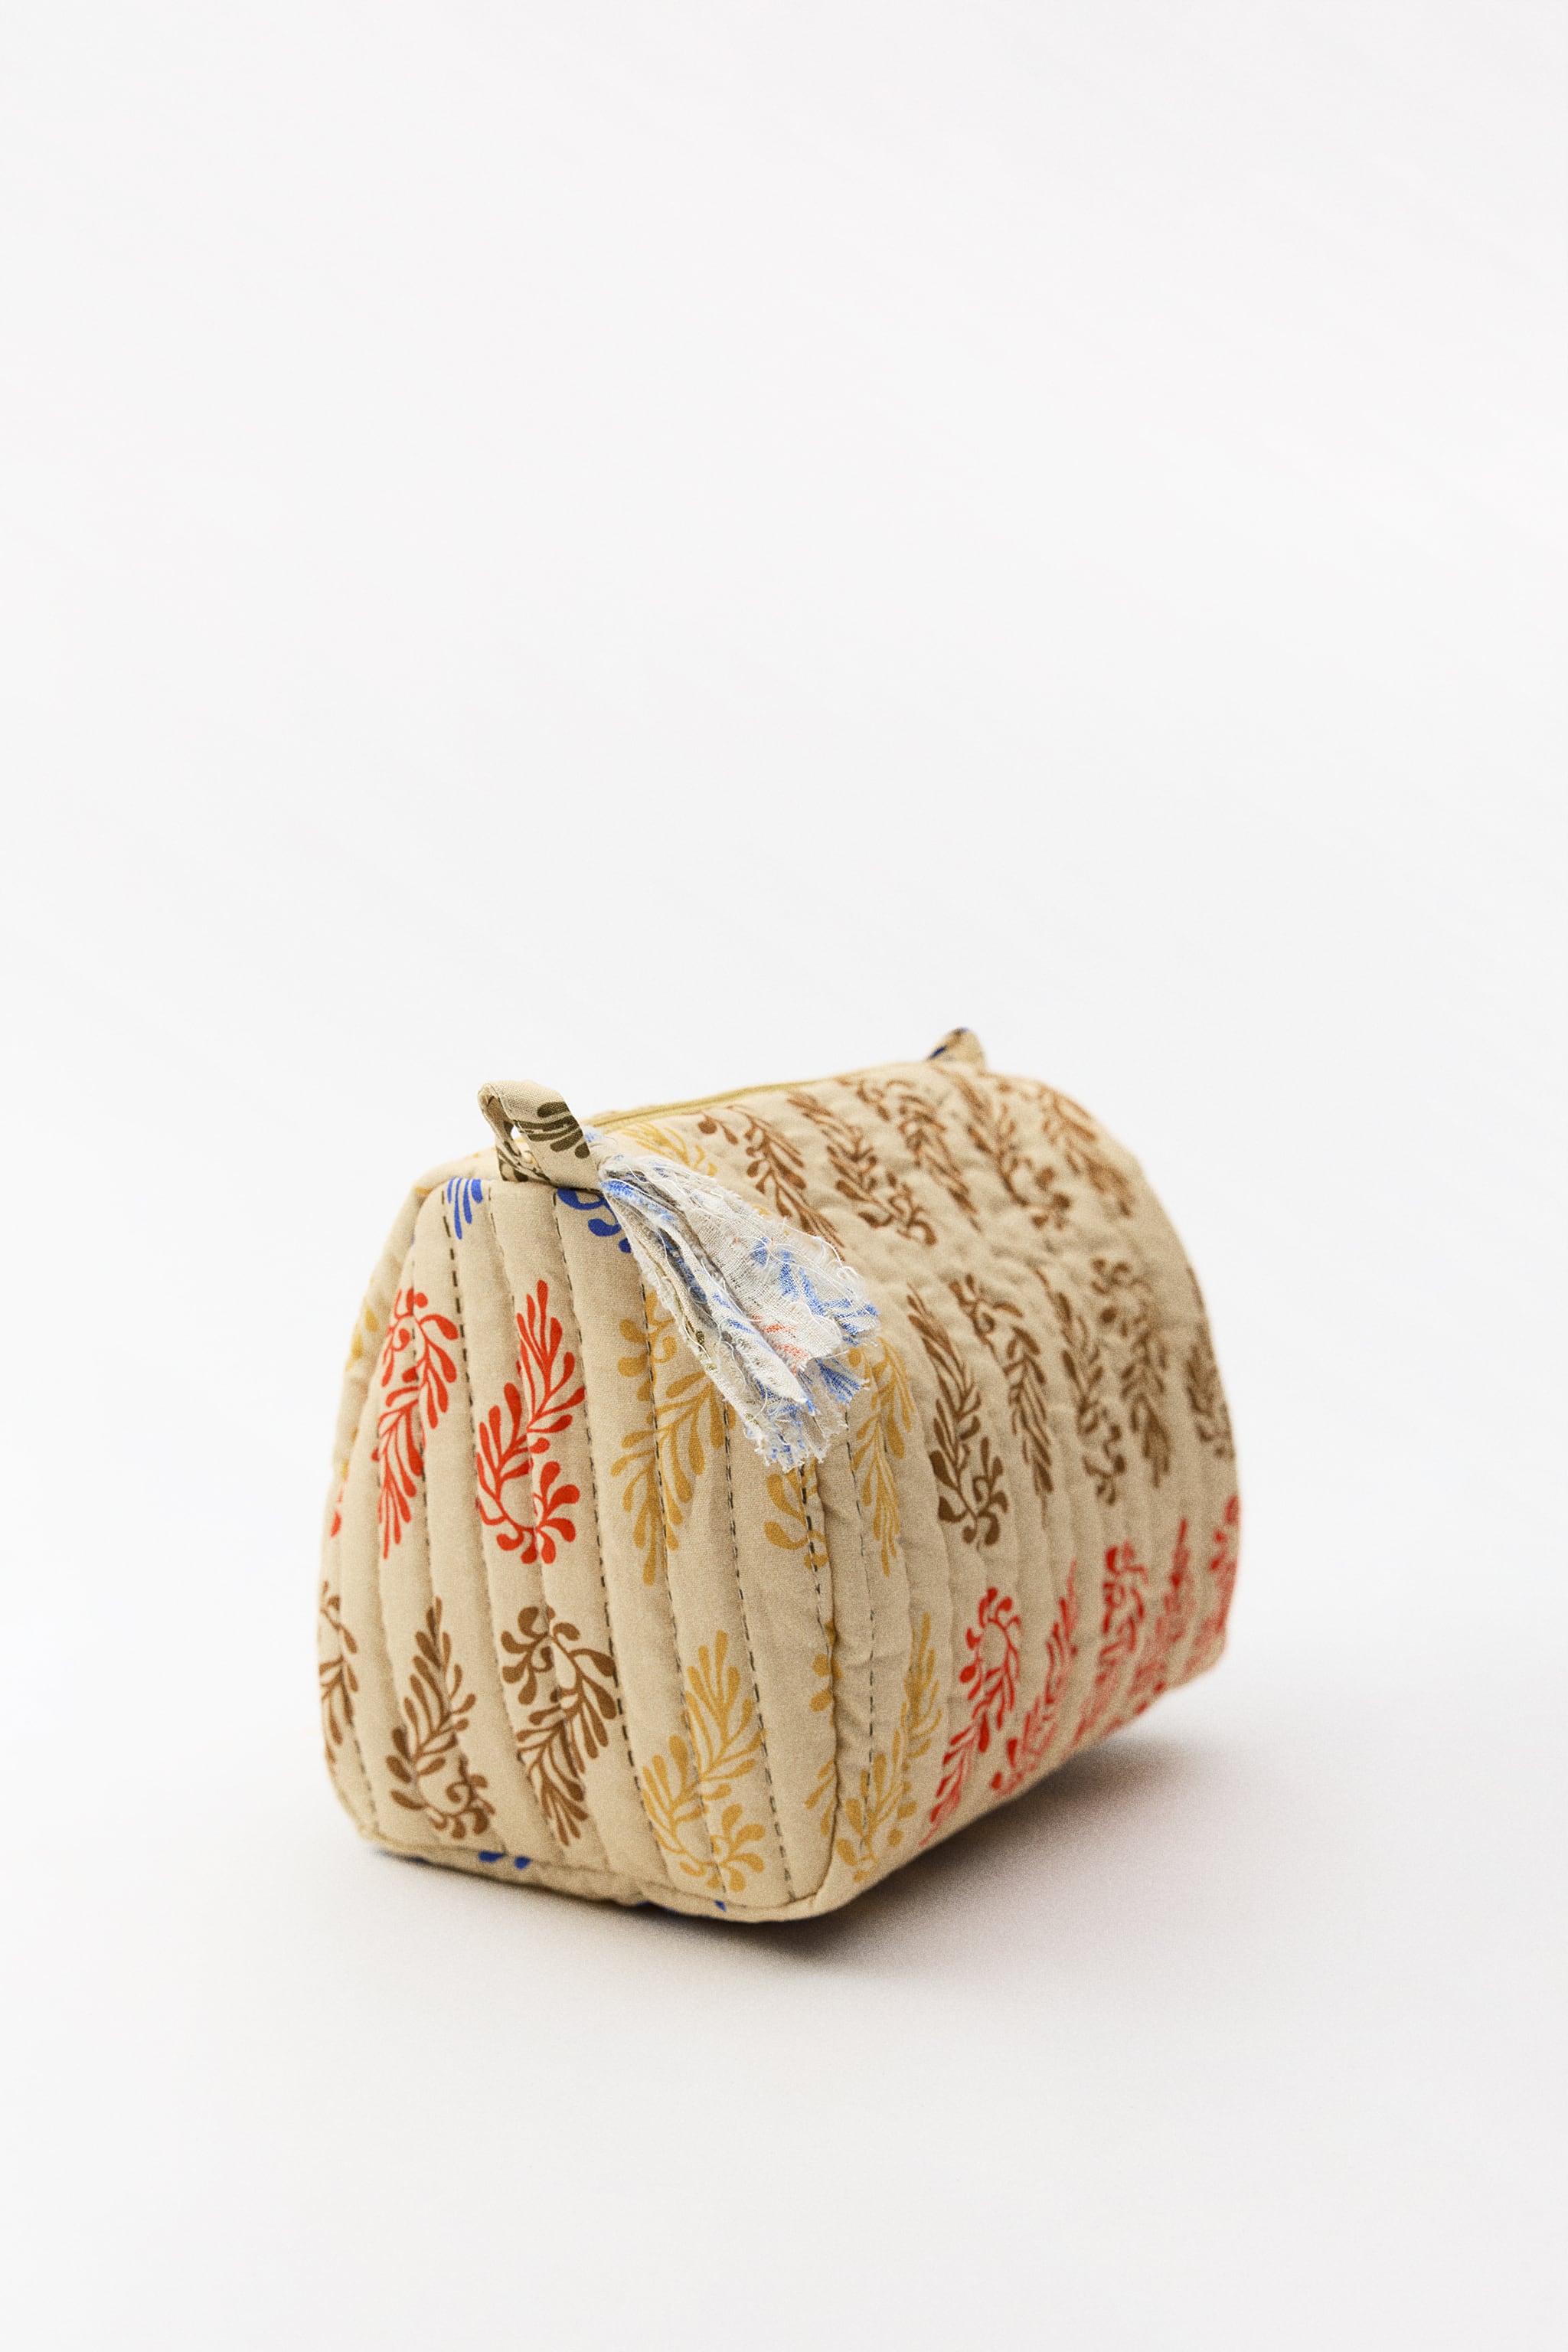 PRINTED QUILTED TOILETRY BAG